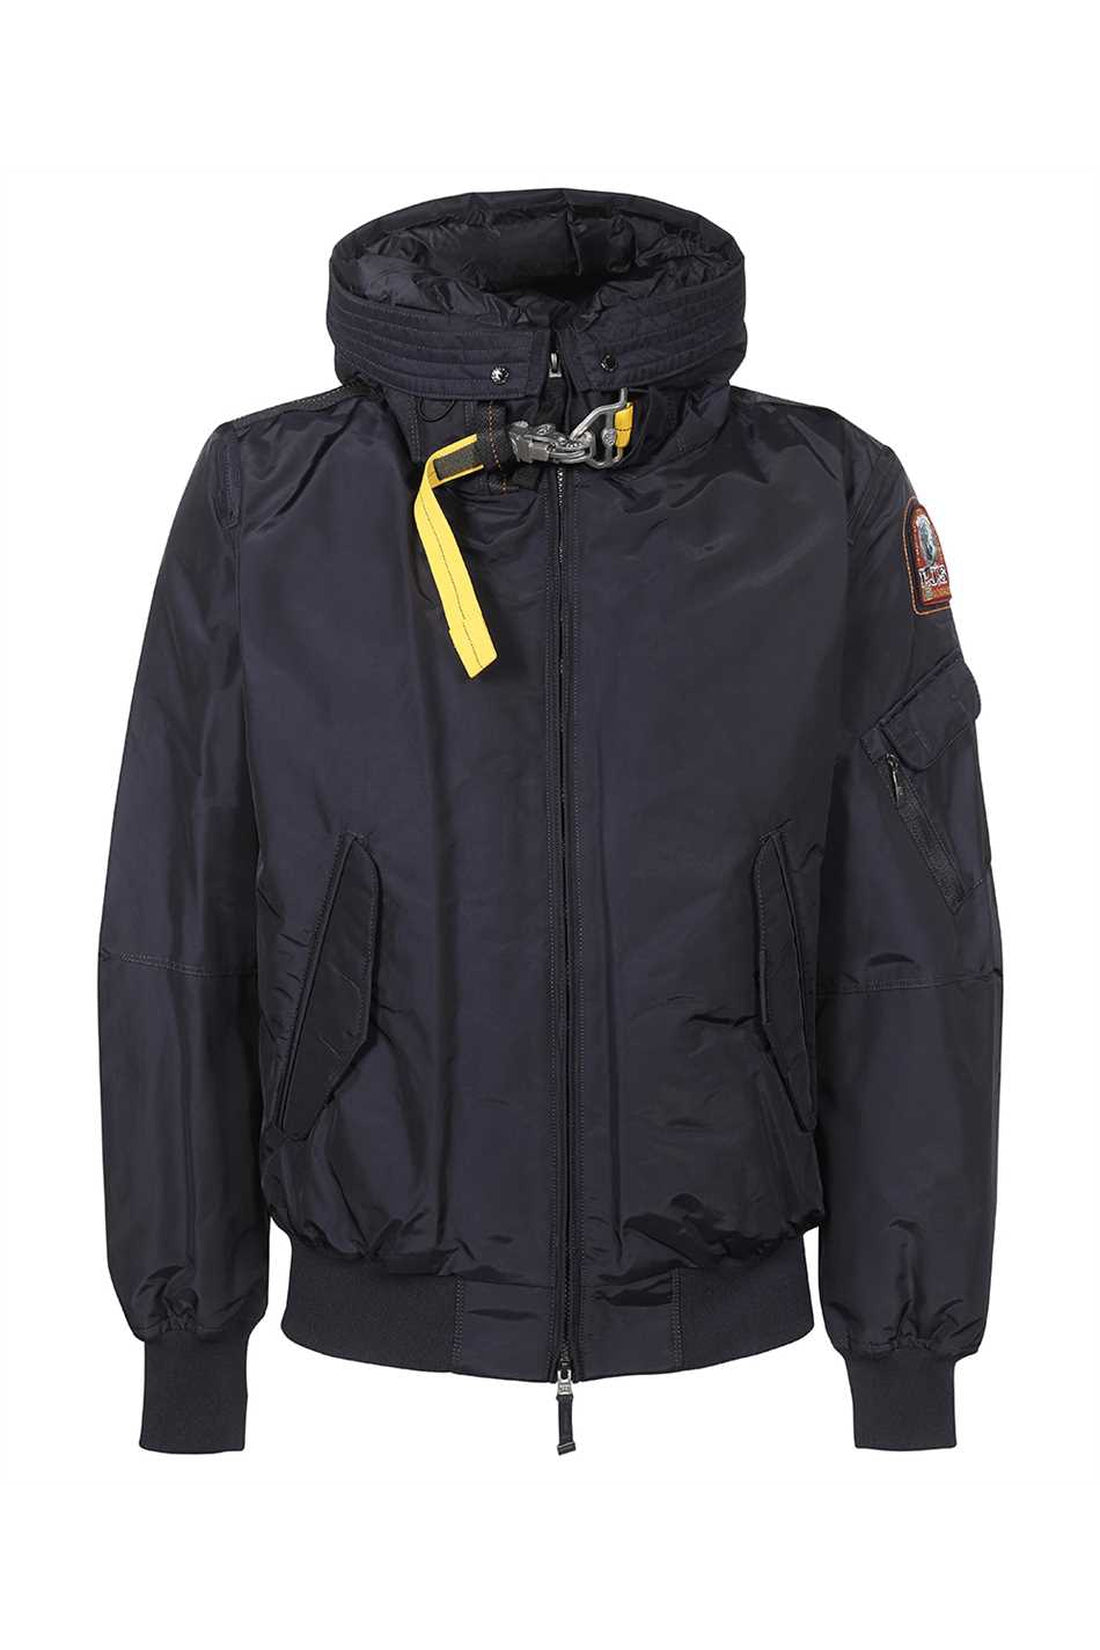 Parajumpers-OUTLET-SALE-Techno fabric padded jacket-ARCHIVIST